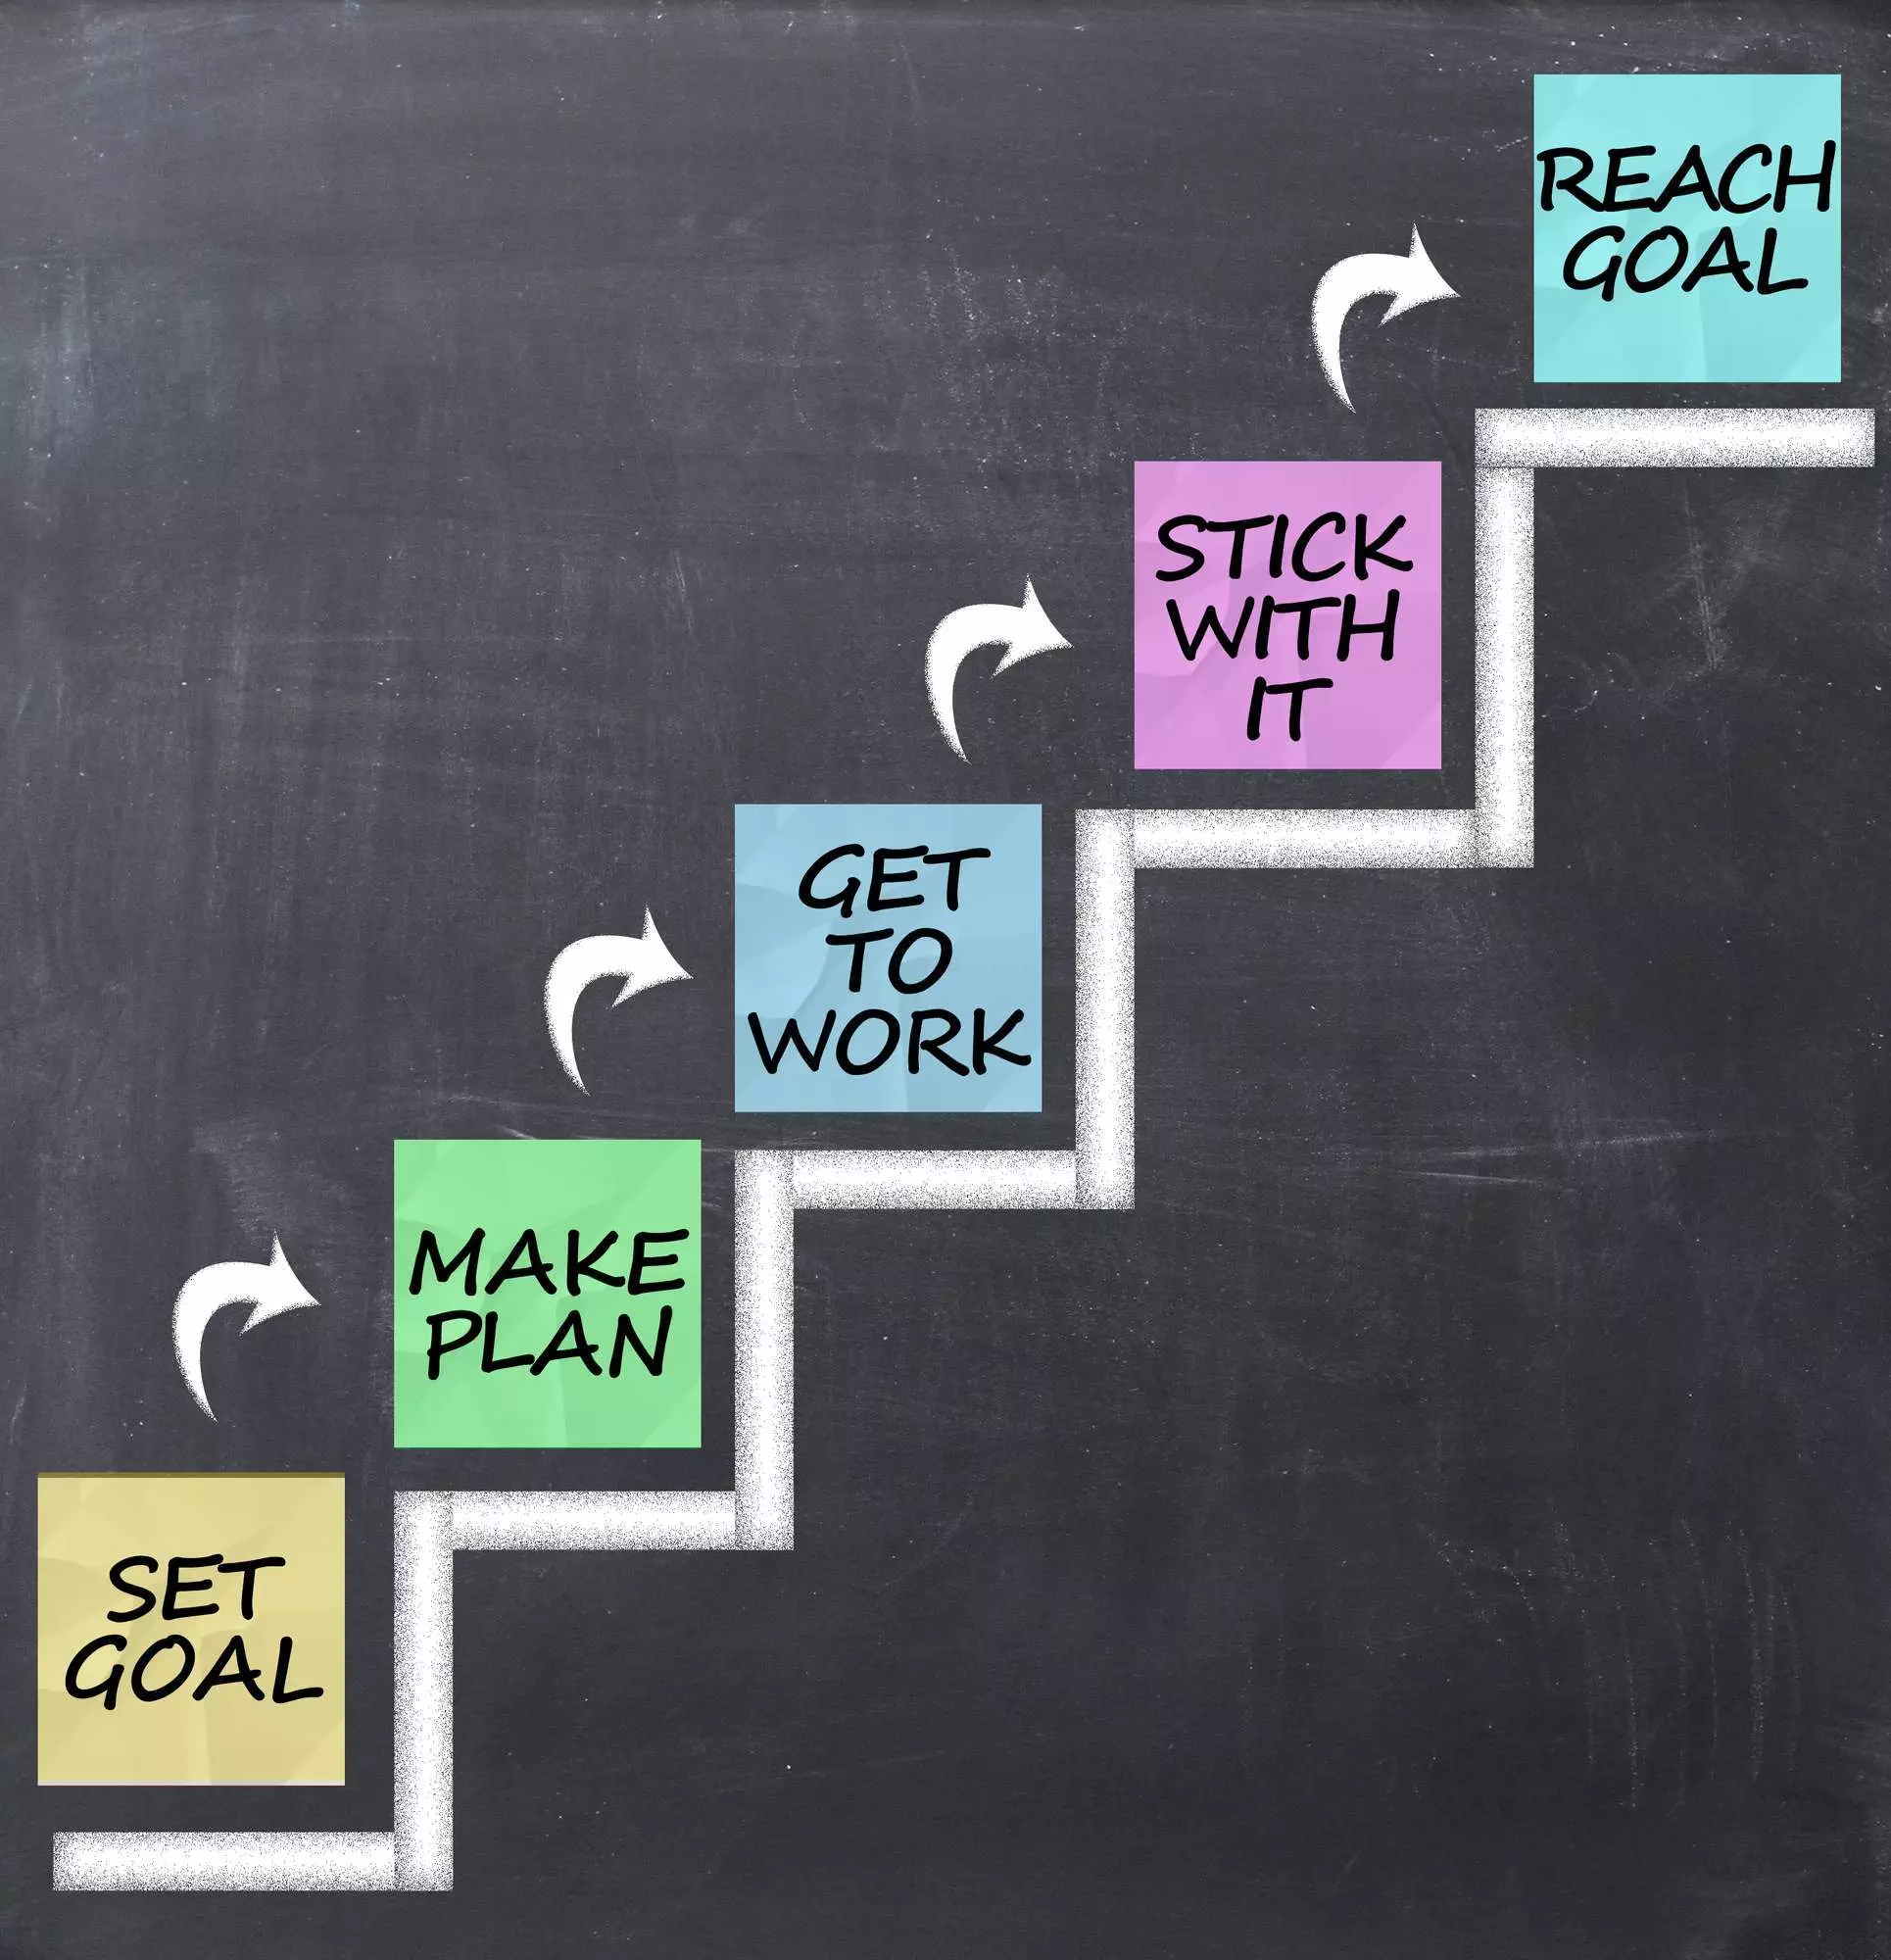 staircase goal setting process